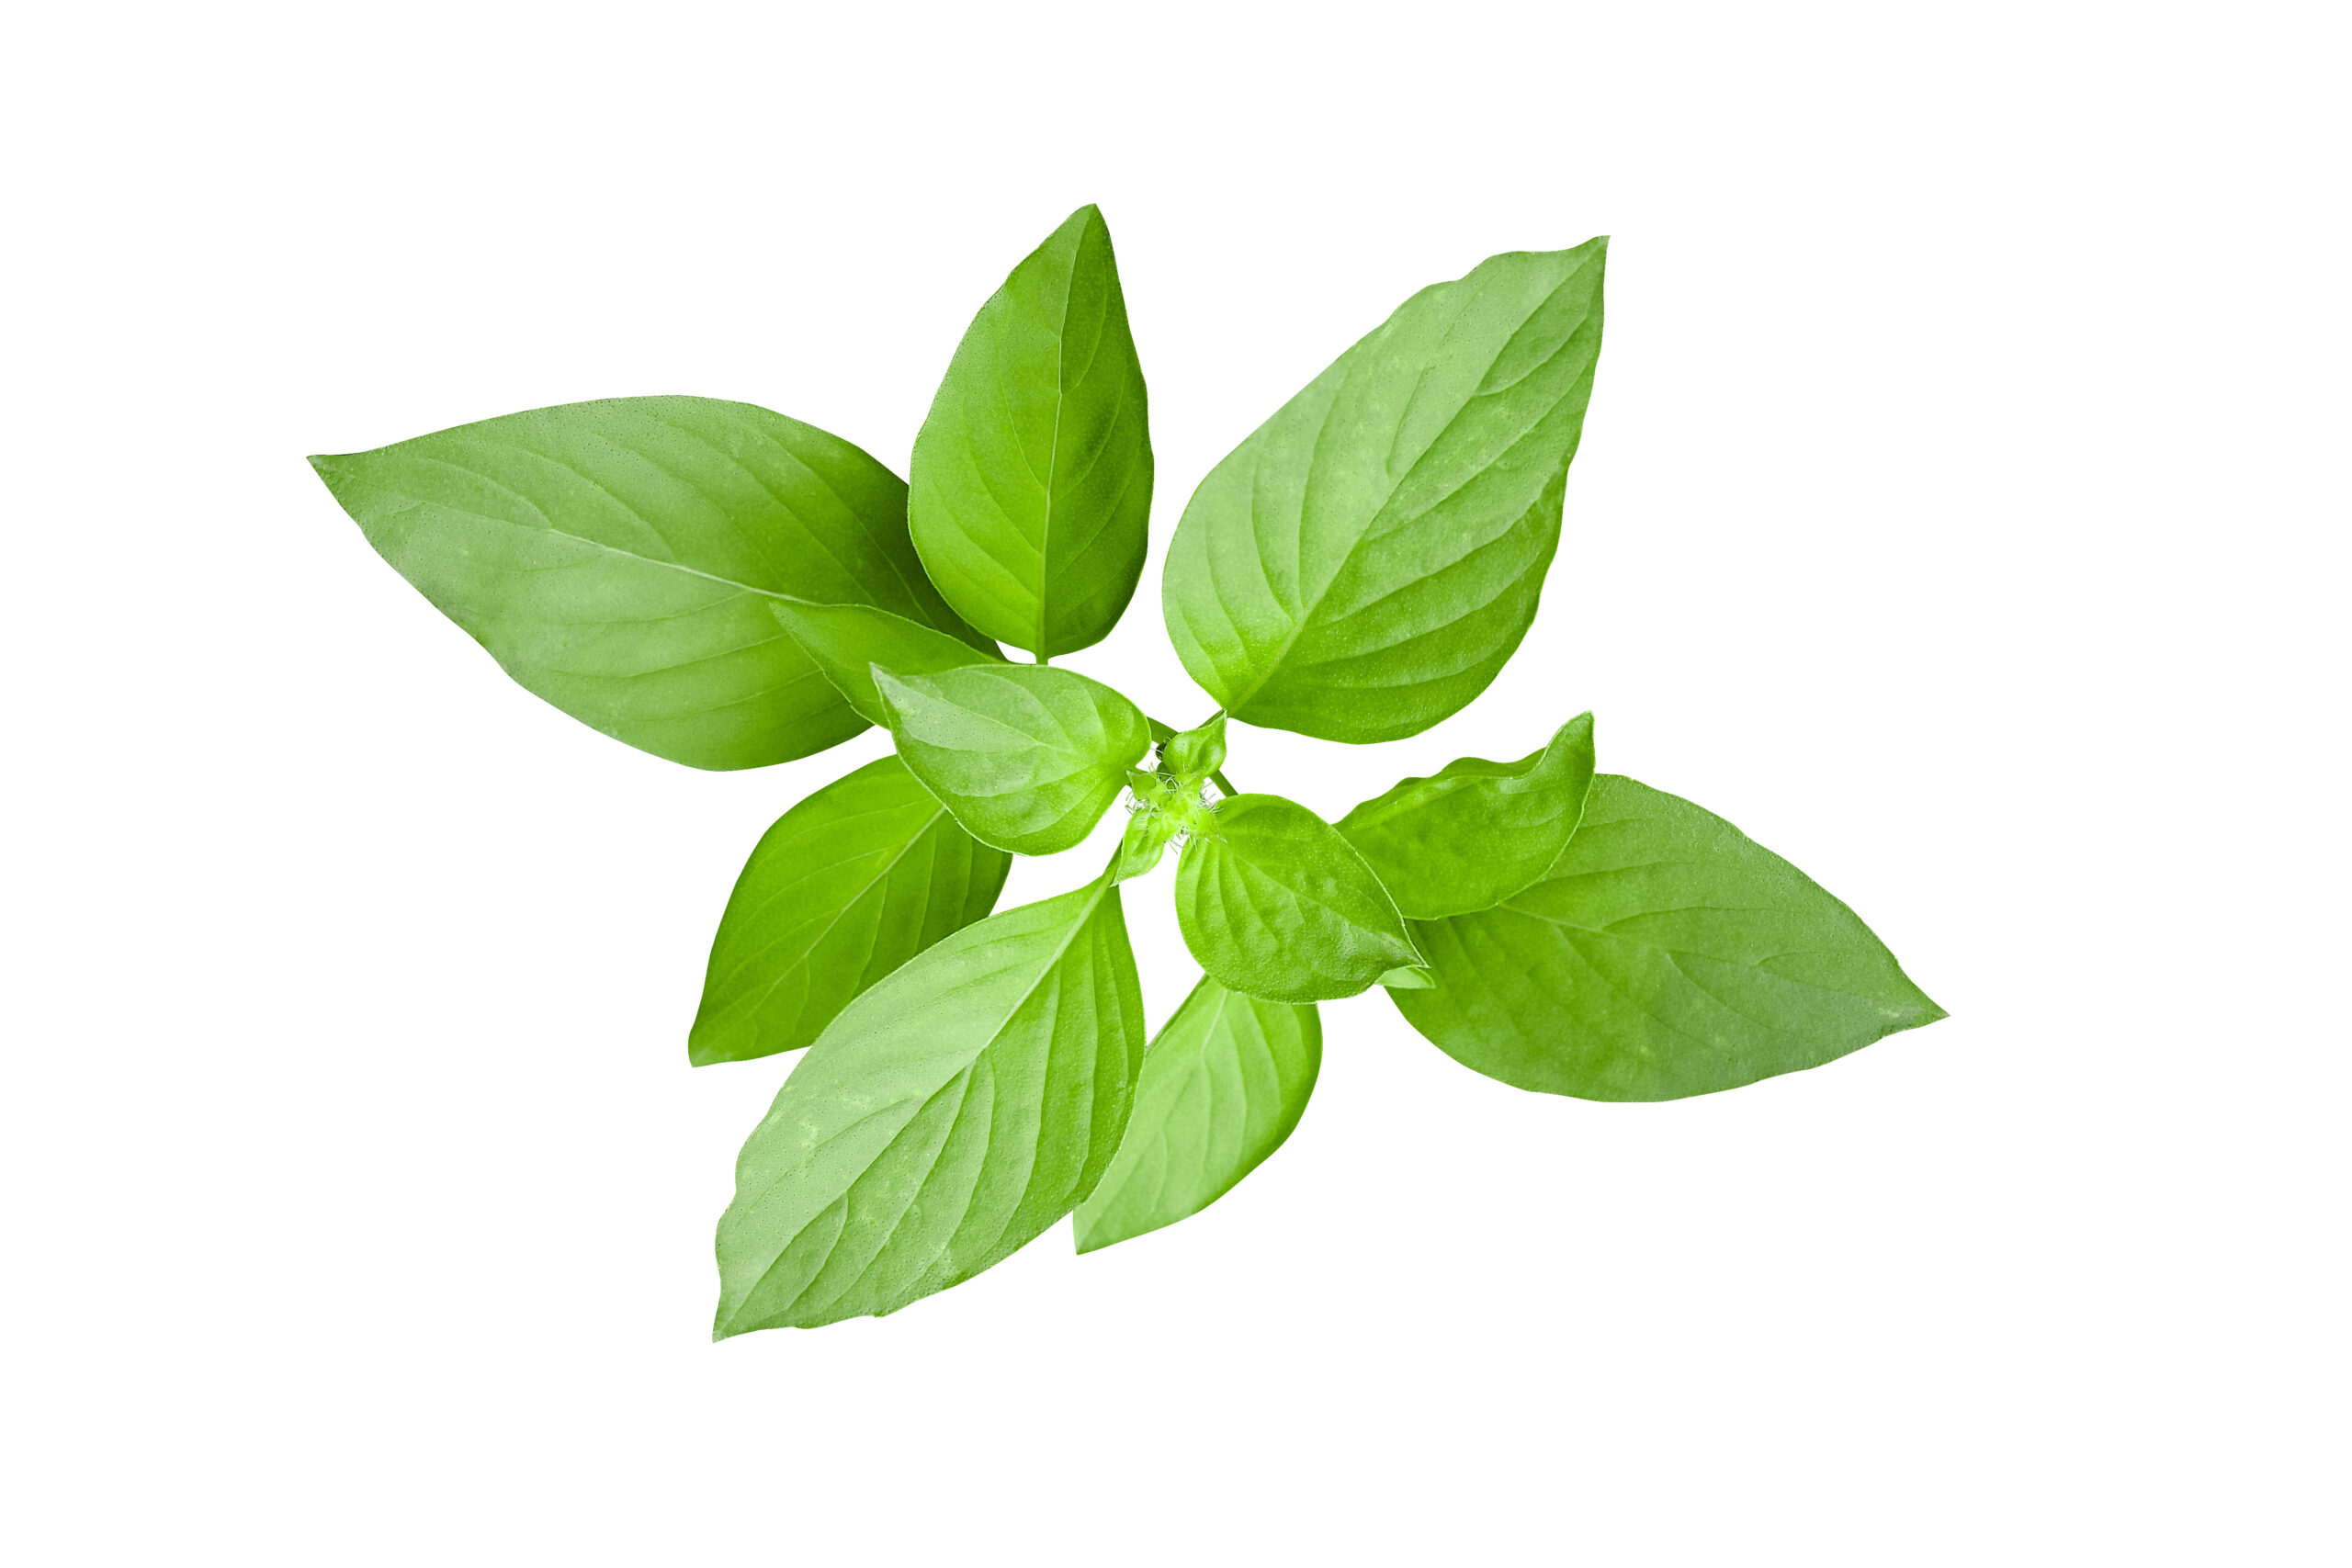 Fresh green leaves of Thai lemon basil or hoary basil tropical herb plant isolated on white background, clipping path included.